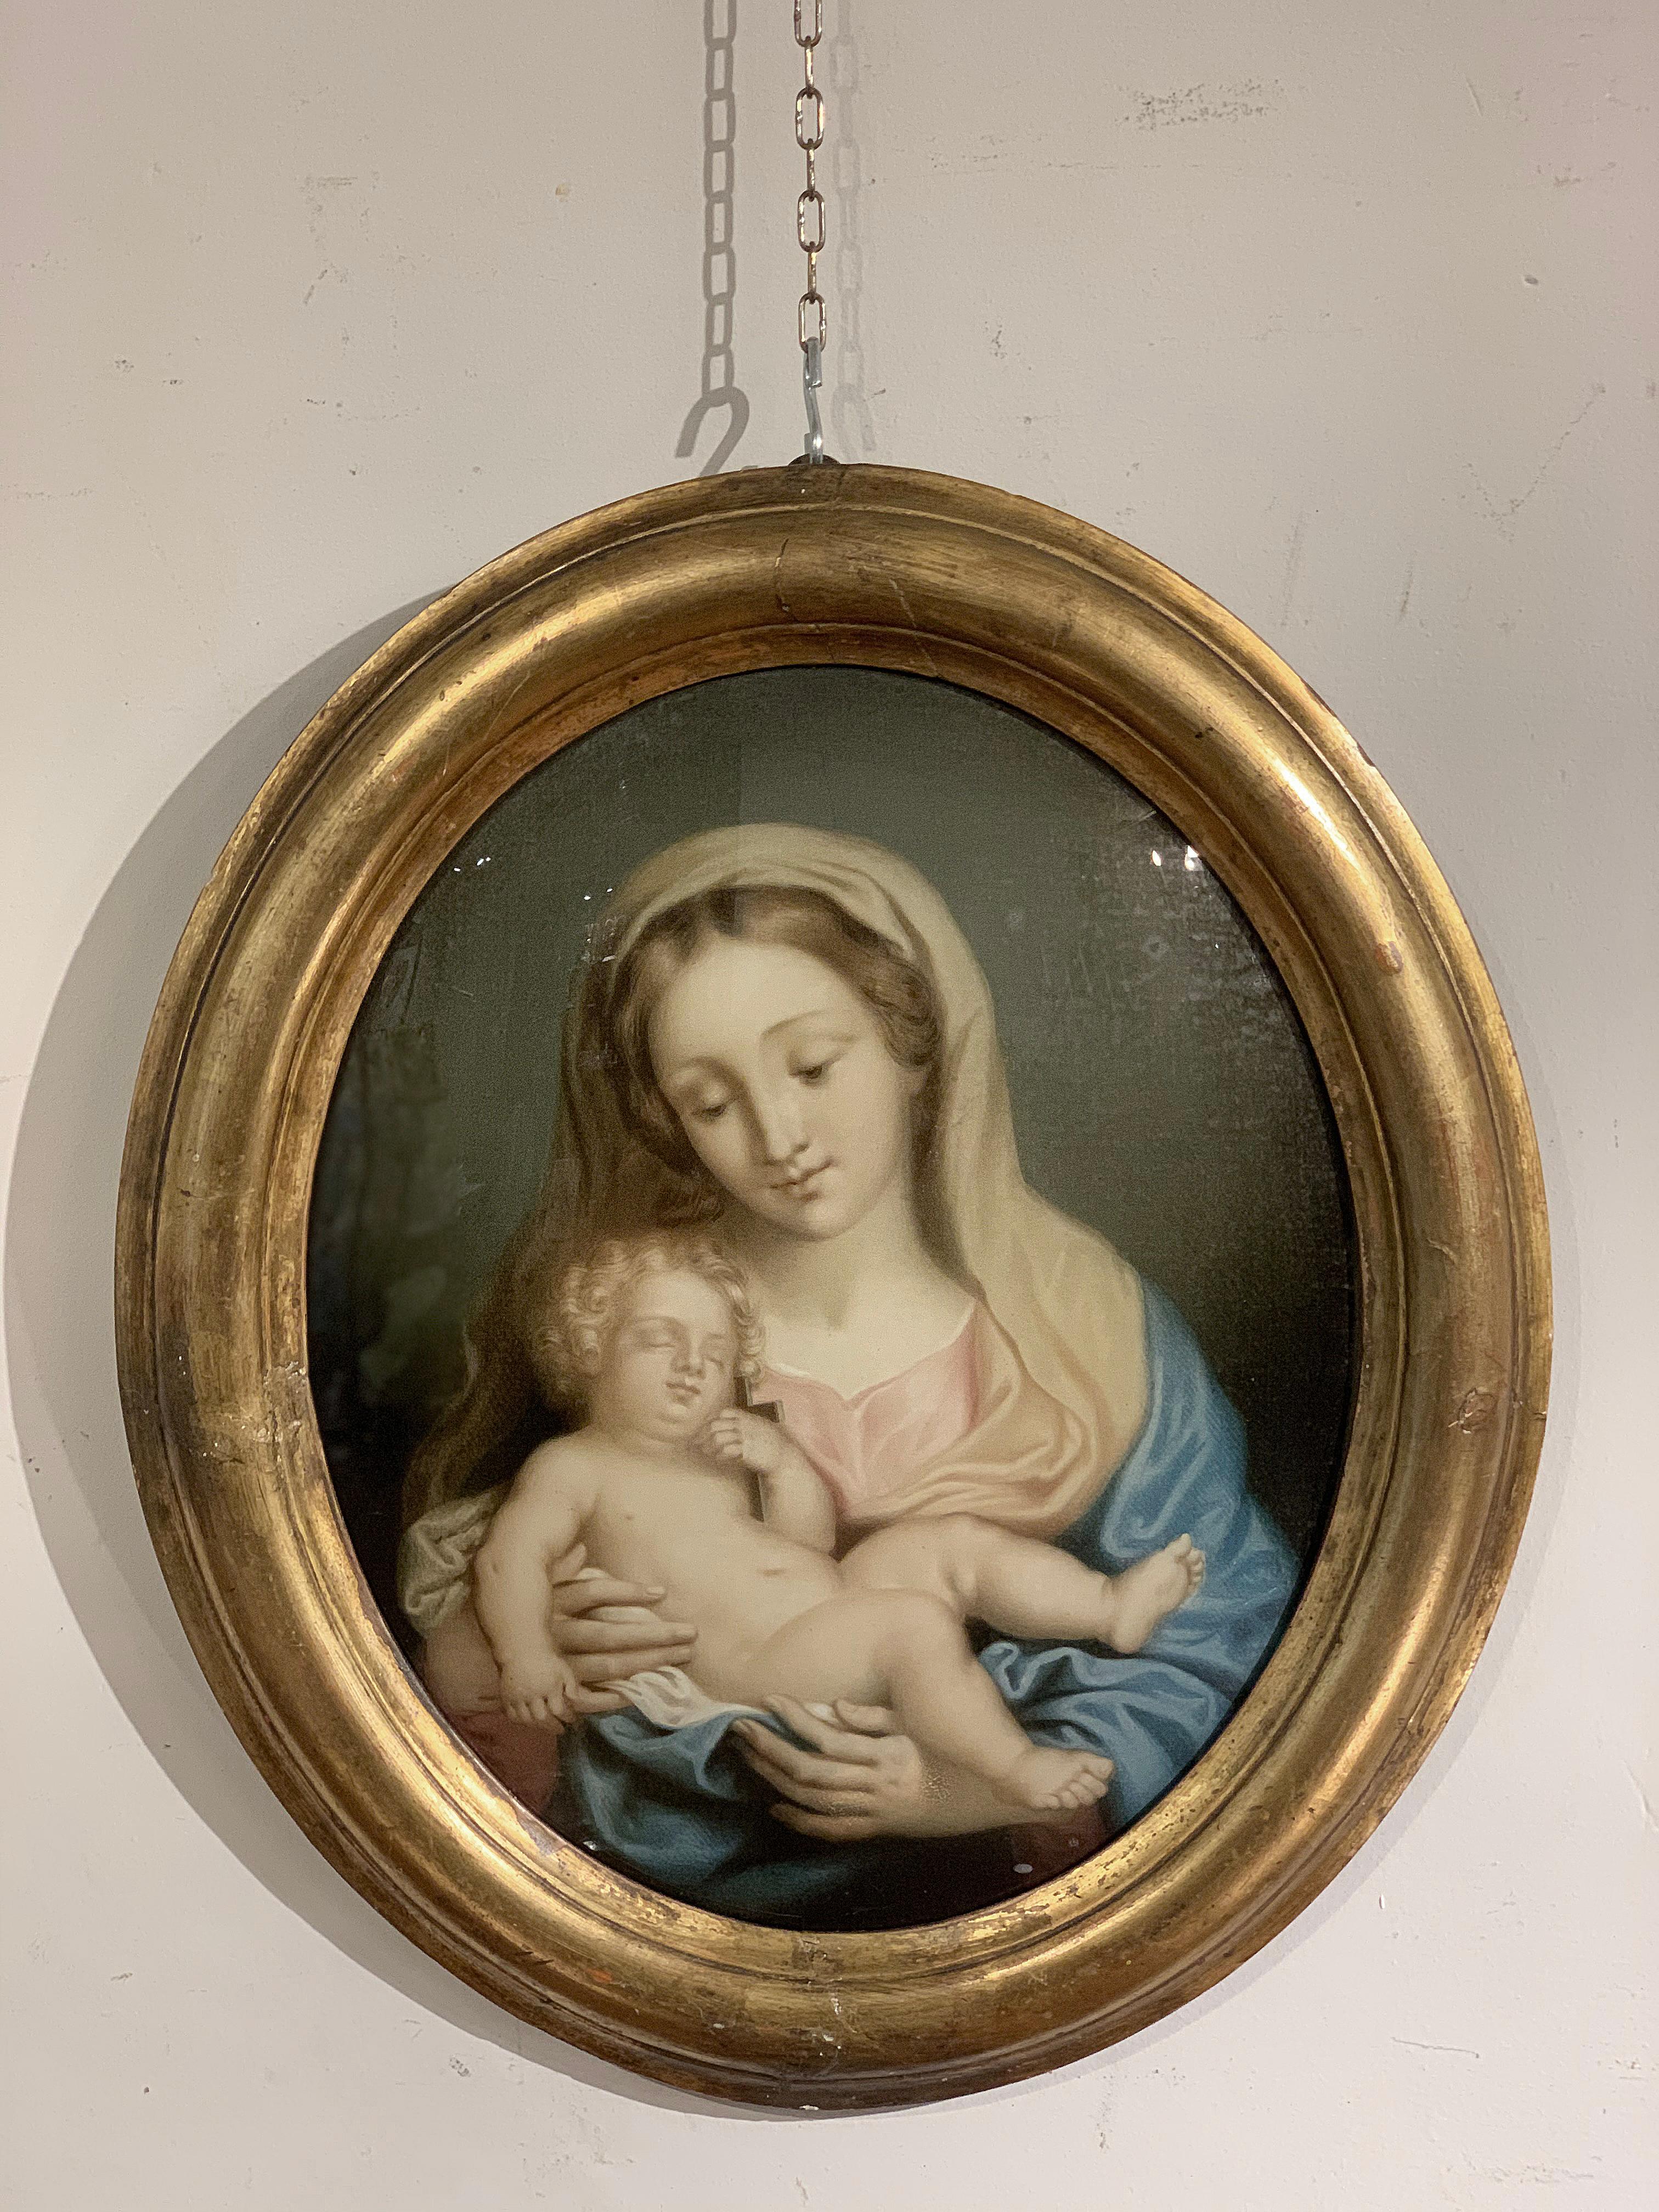 Fascinating painting representing the Madonna with the Child Jesus, painted on the back on a delicate glass panel. This work can be attributed to the Tuscan School of the early 19th century and stands out for its extraordinary precision in detail